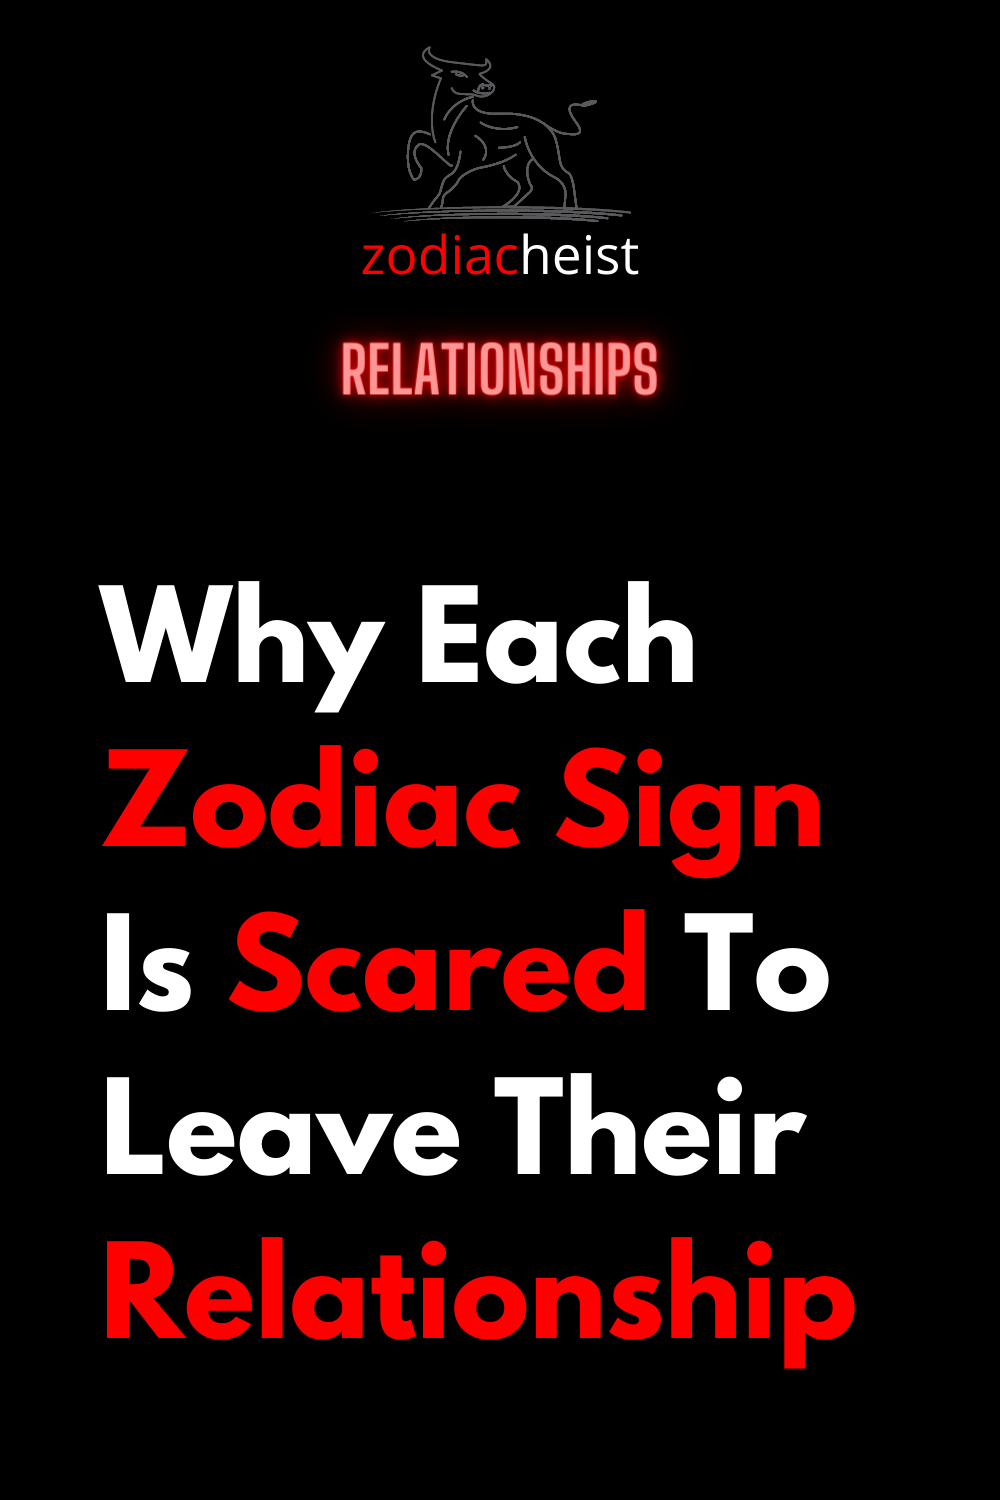 Why Each Zodiac Sign Is Scared To Leave Their Relationship